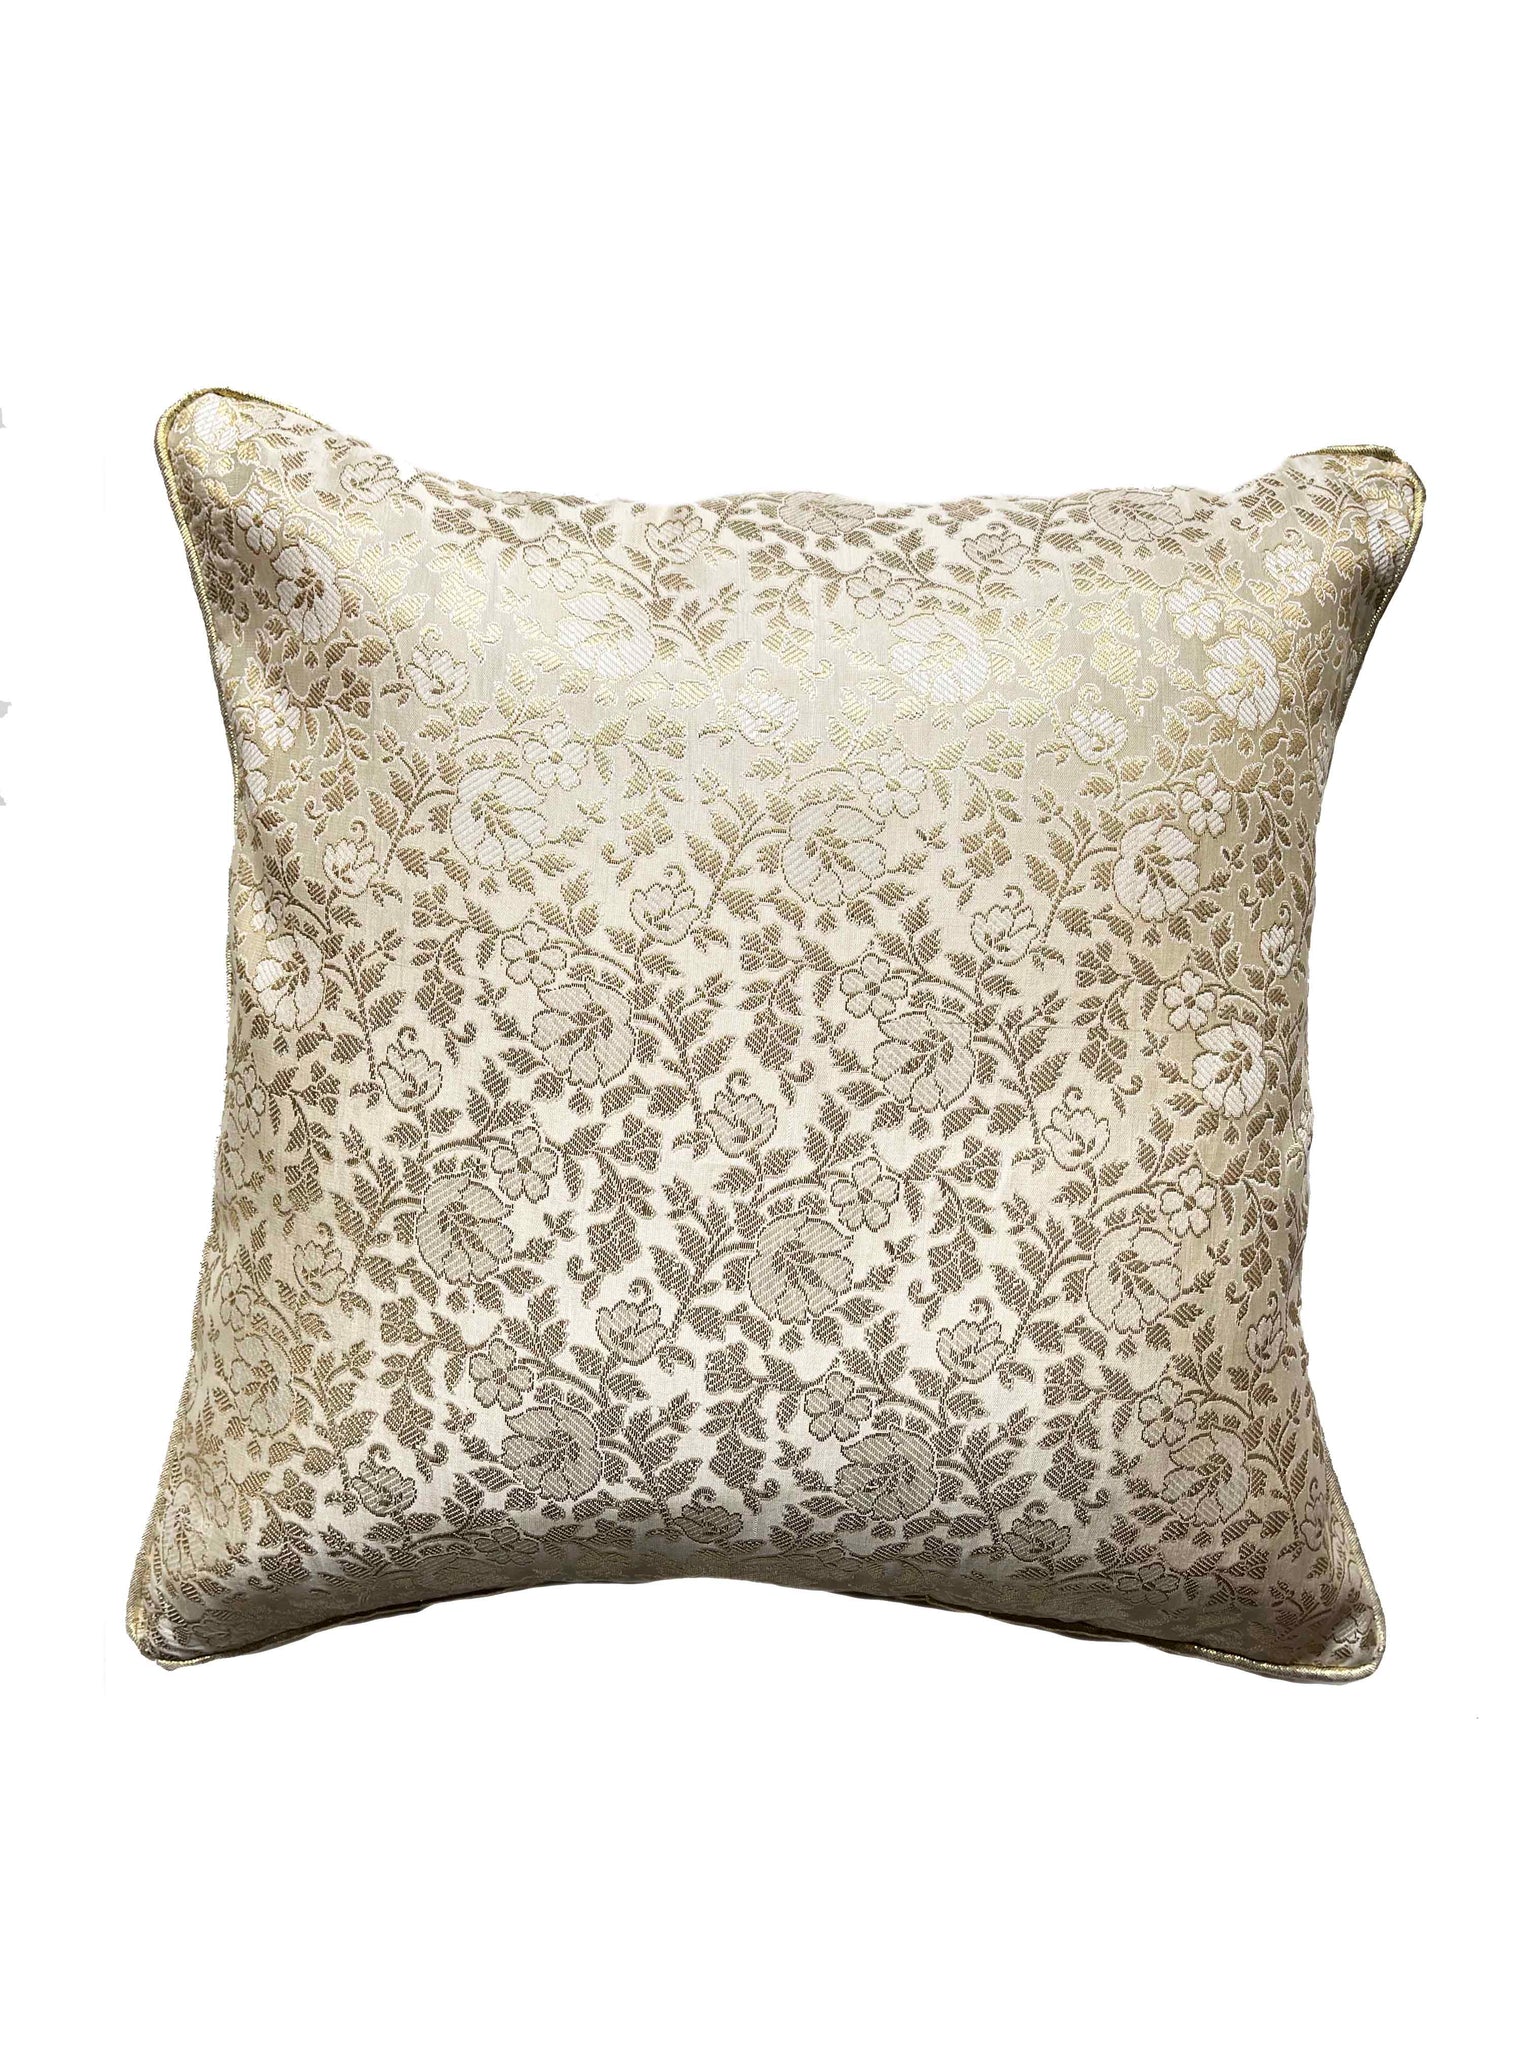 Ivory Brocade Cushion Cover